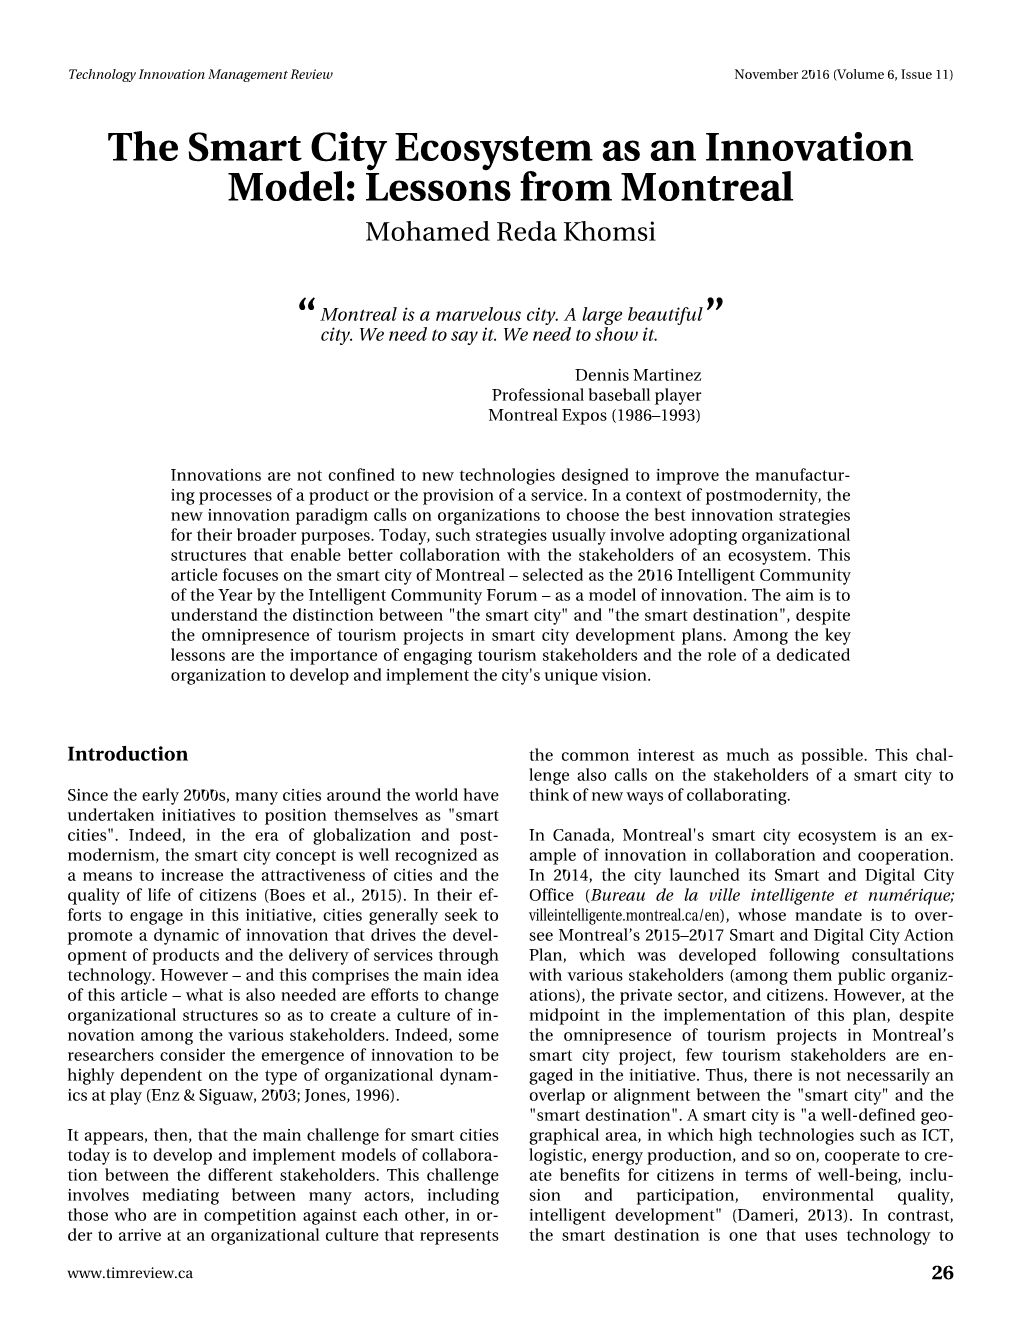 The Smart City Ecosystem As an Innovation Model: Lessons from Montreal Mohamed Reda Khomsi